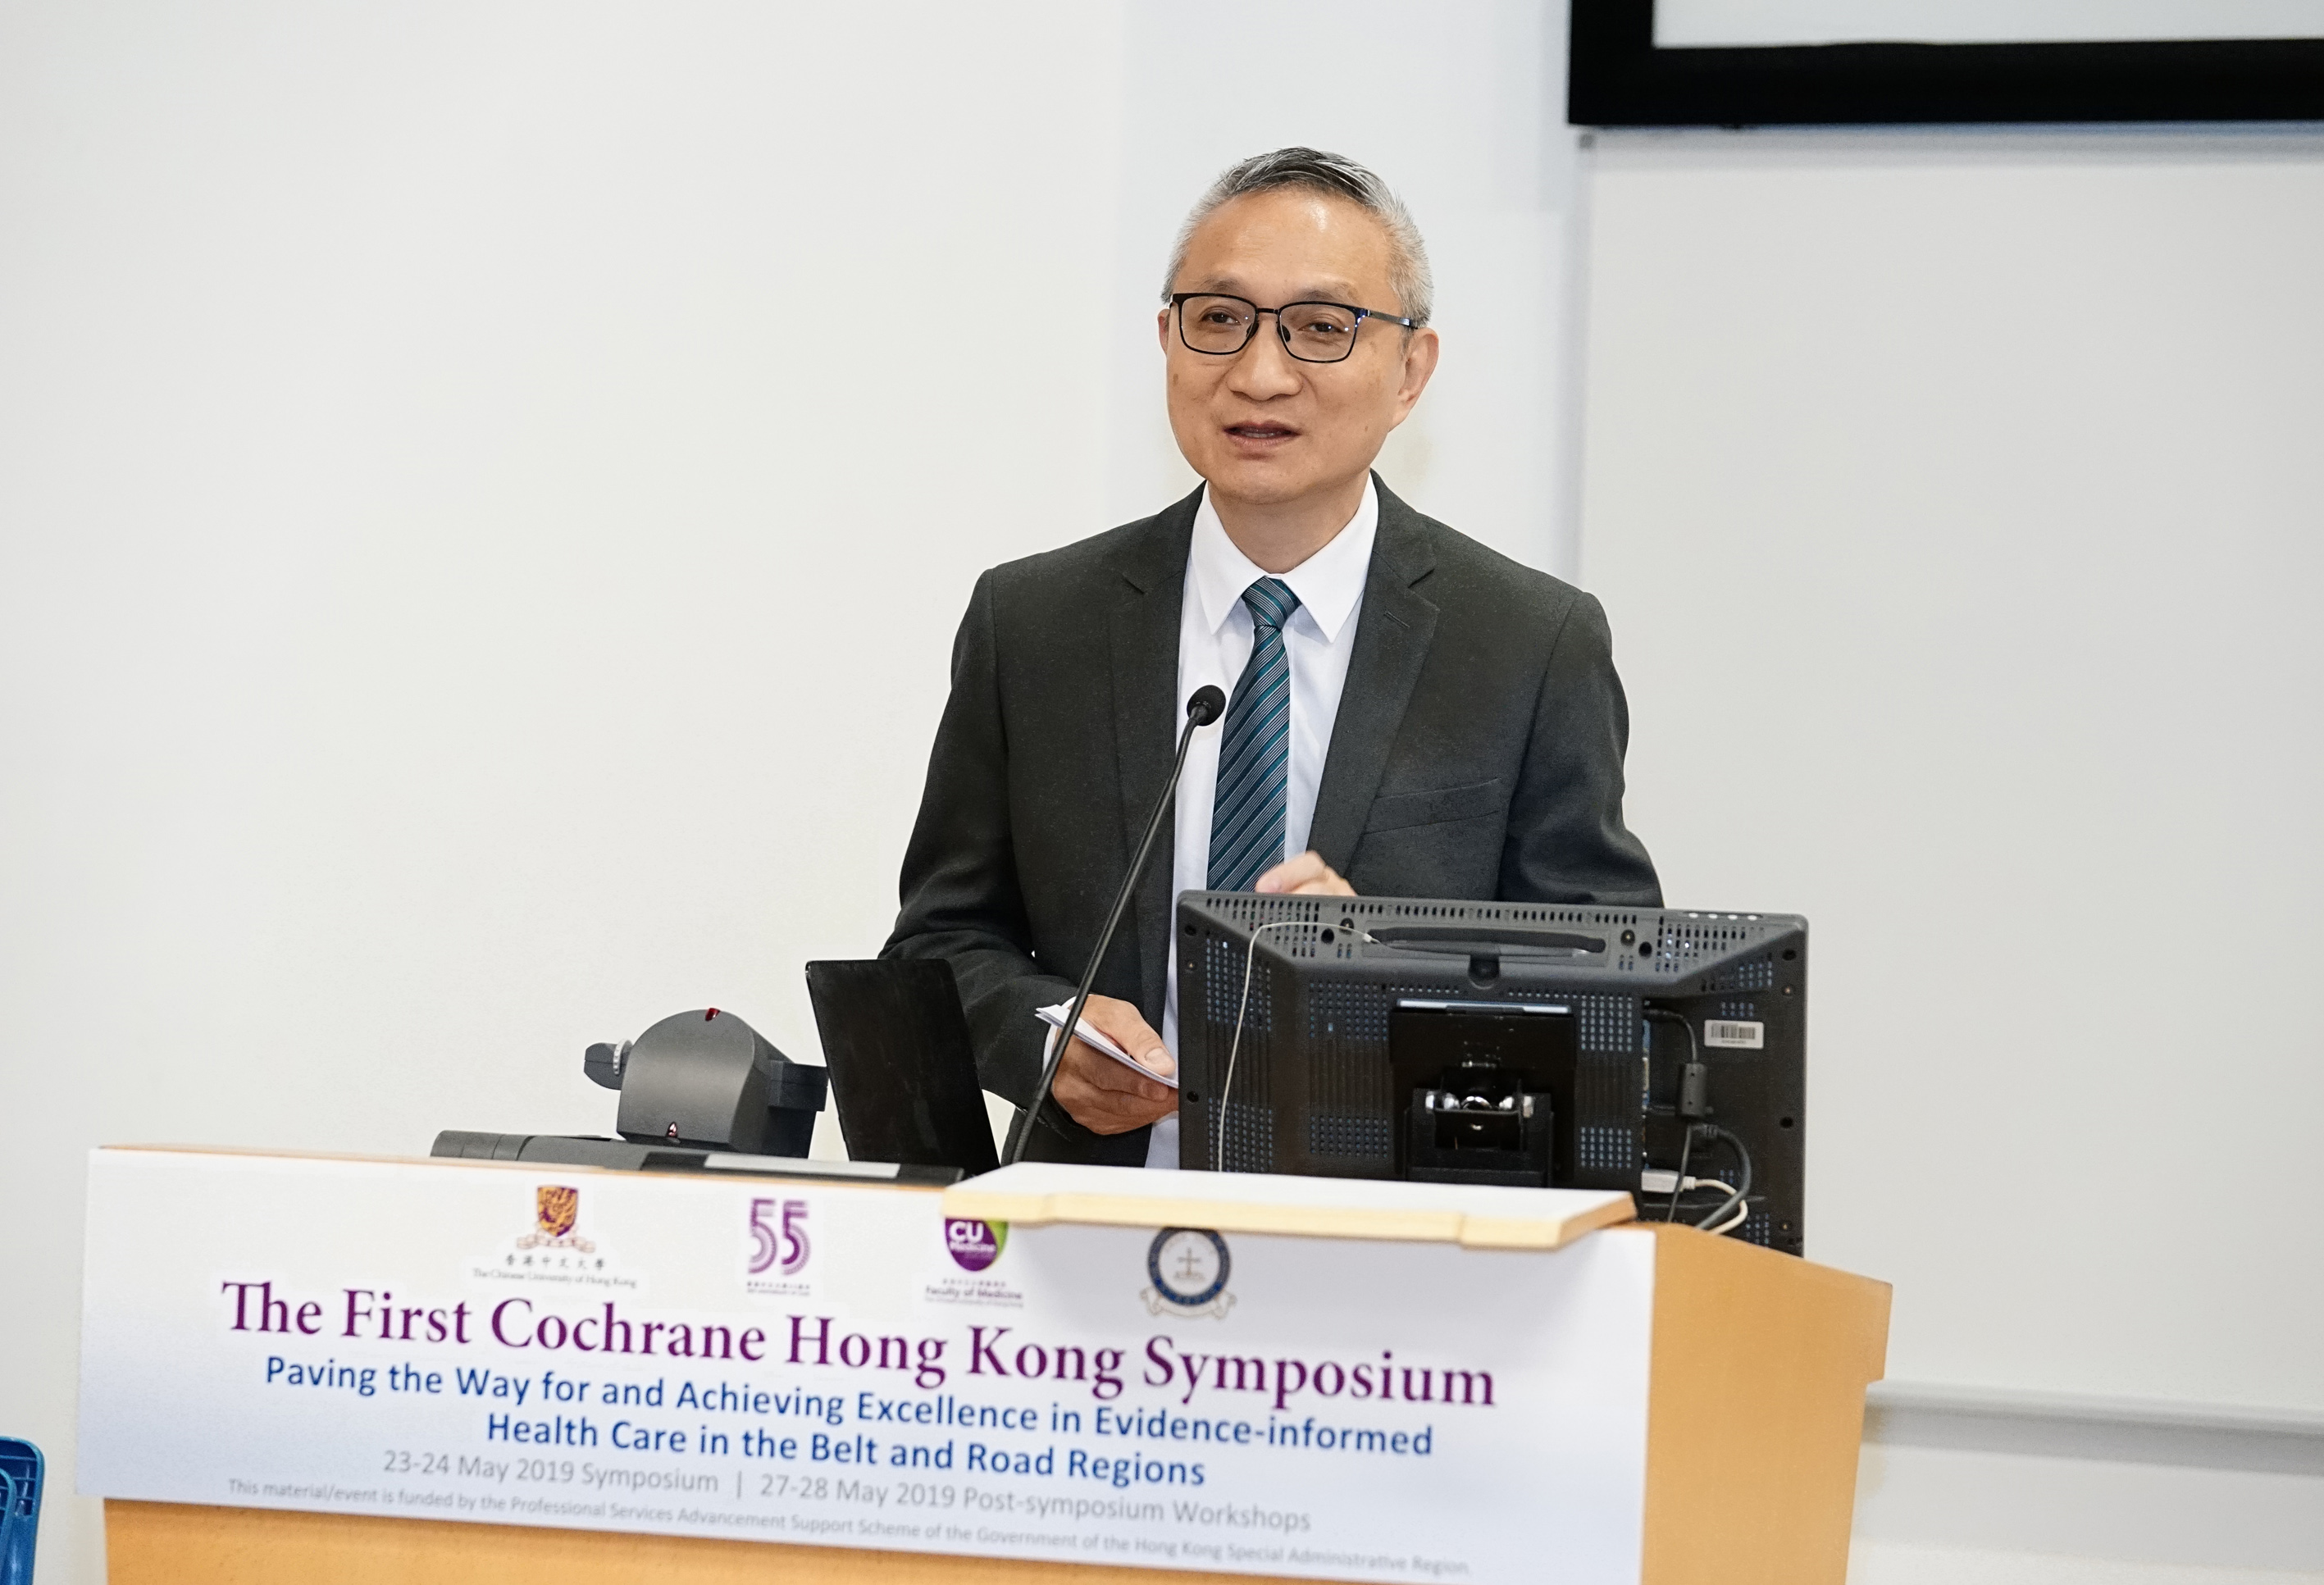 Dr. CHUI Tak Yi, Under Secretary for Food and Health says the Hong Kong government  supports evidence-based research through its Health and Medical Research Fund (HMRF).